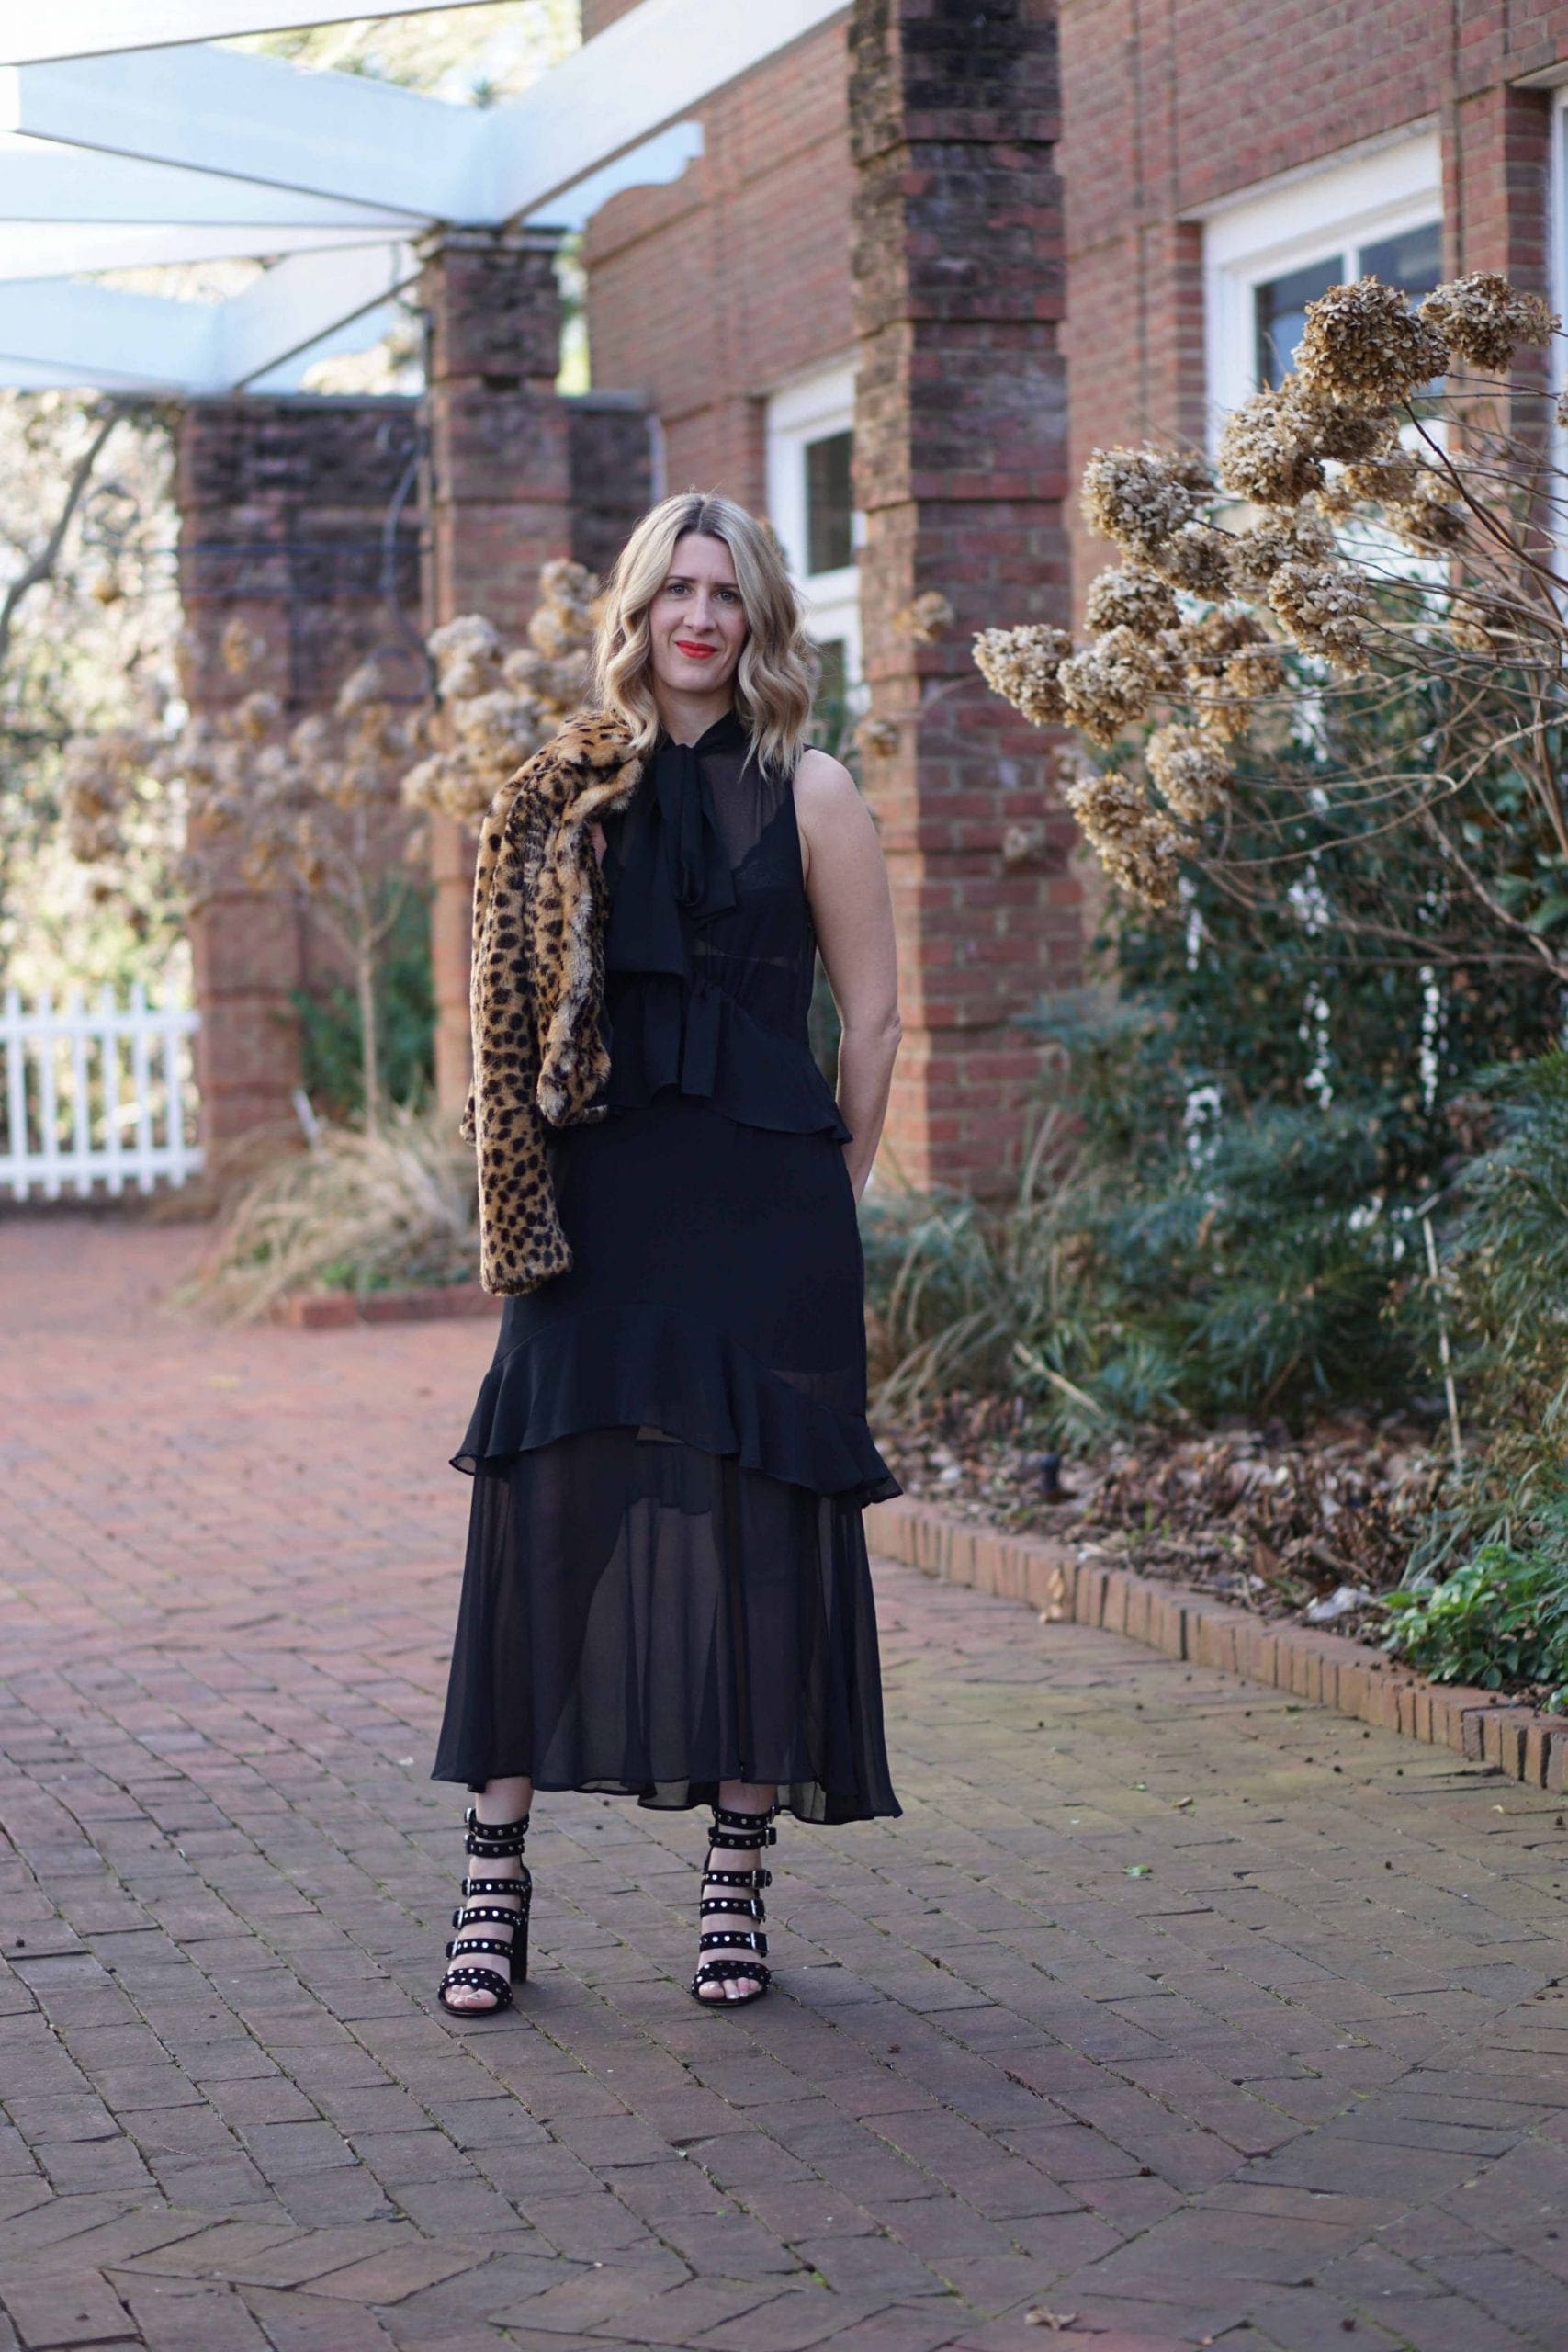 A black sheer dress worn for the evening with a leopard print coat